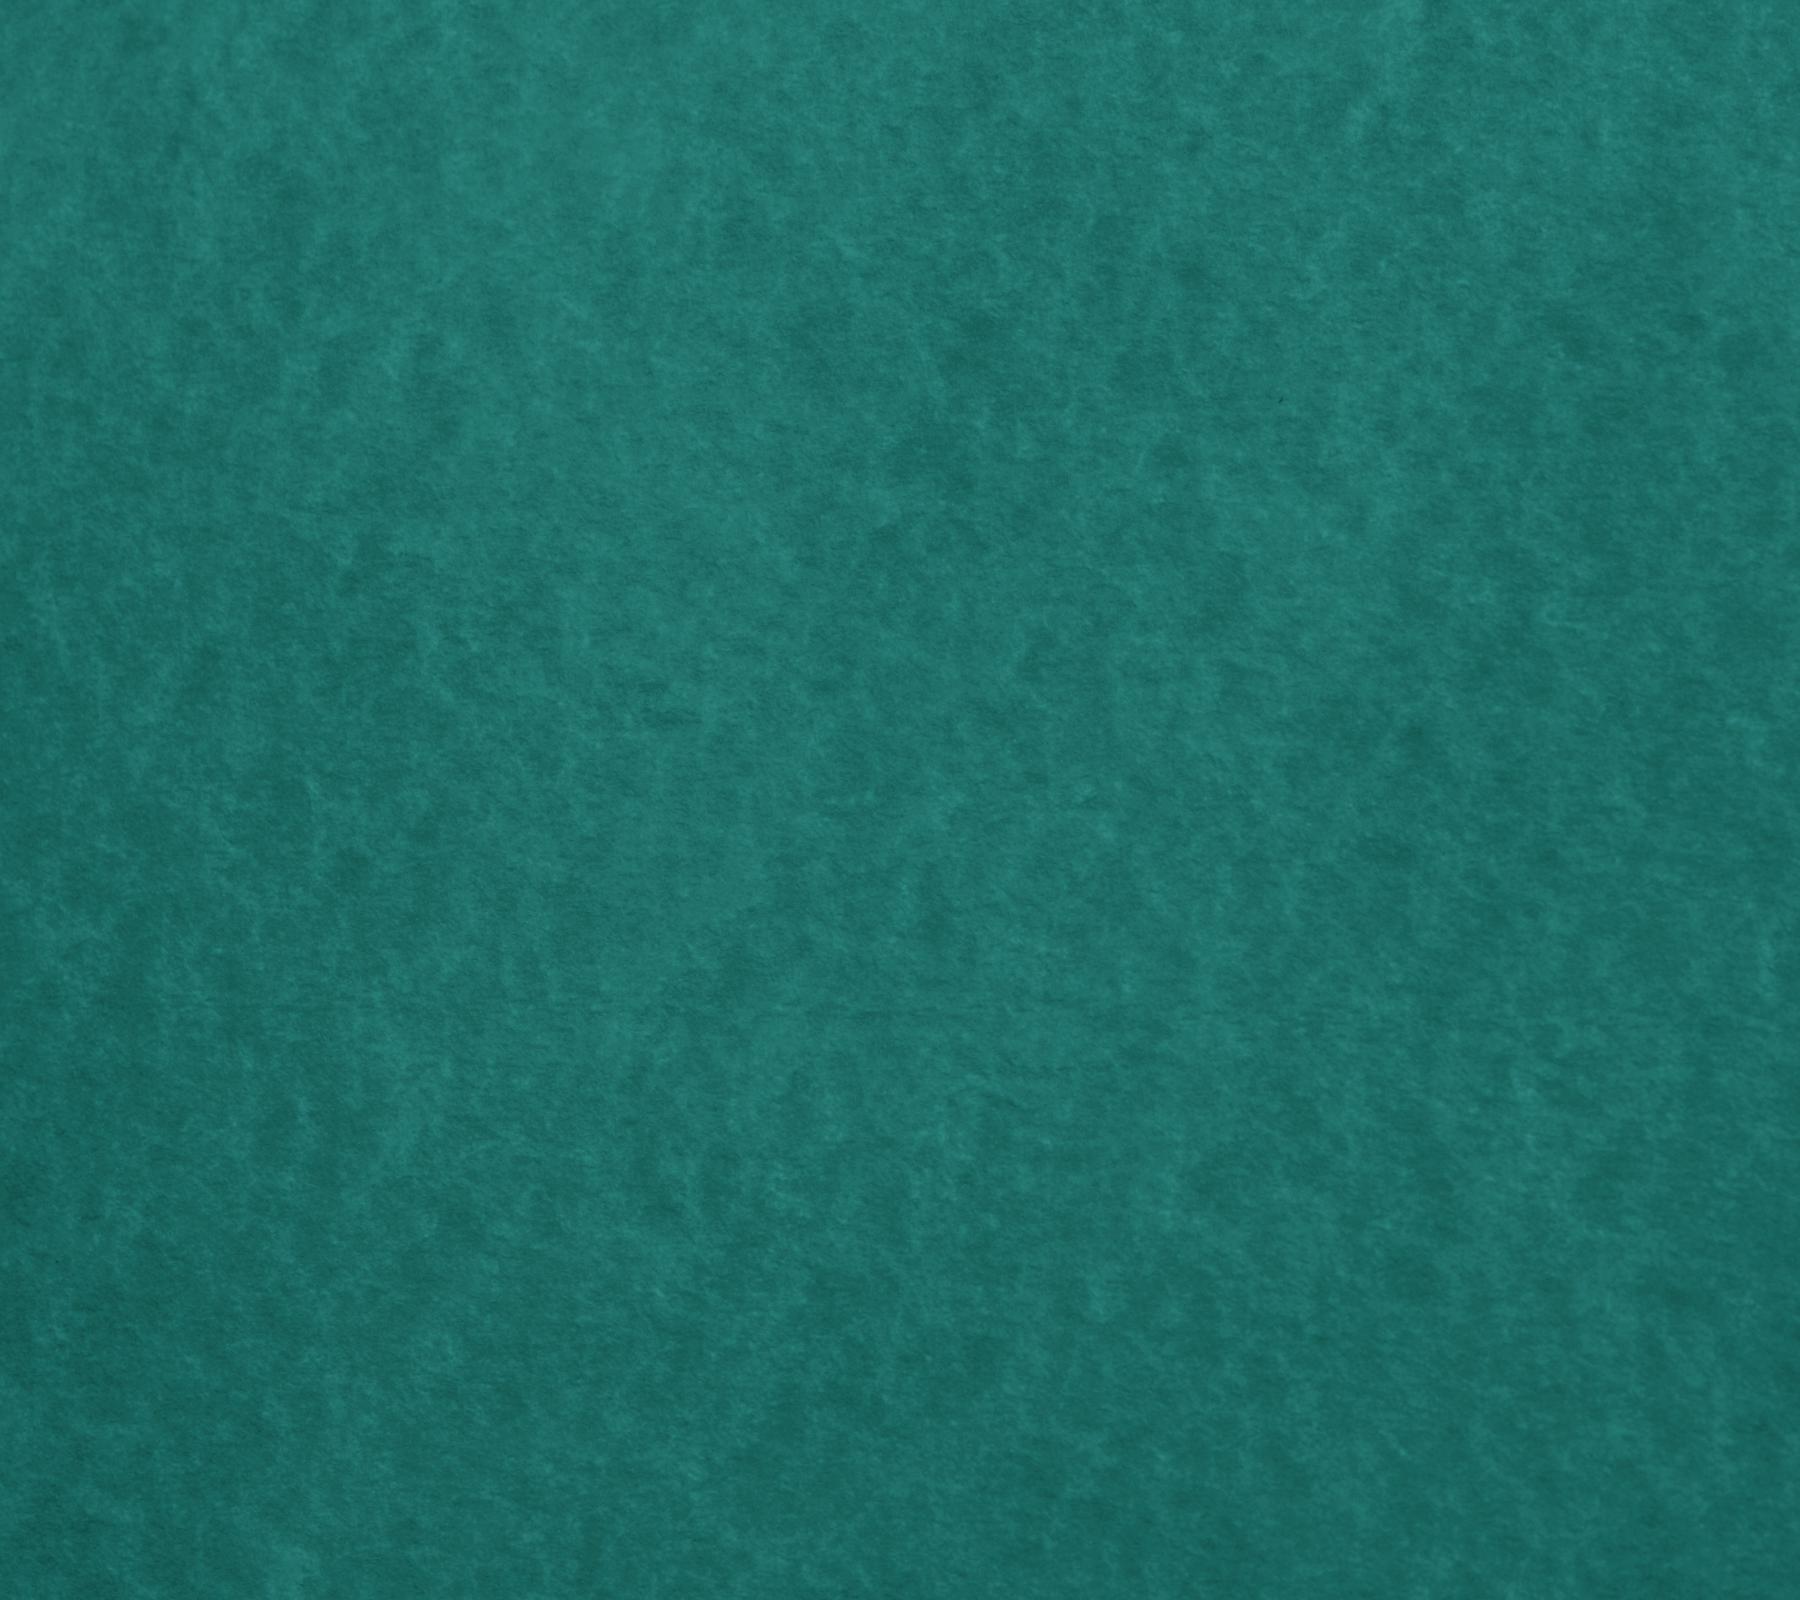 Teal Parchment Paper Background Image